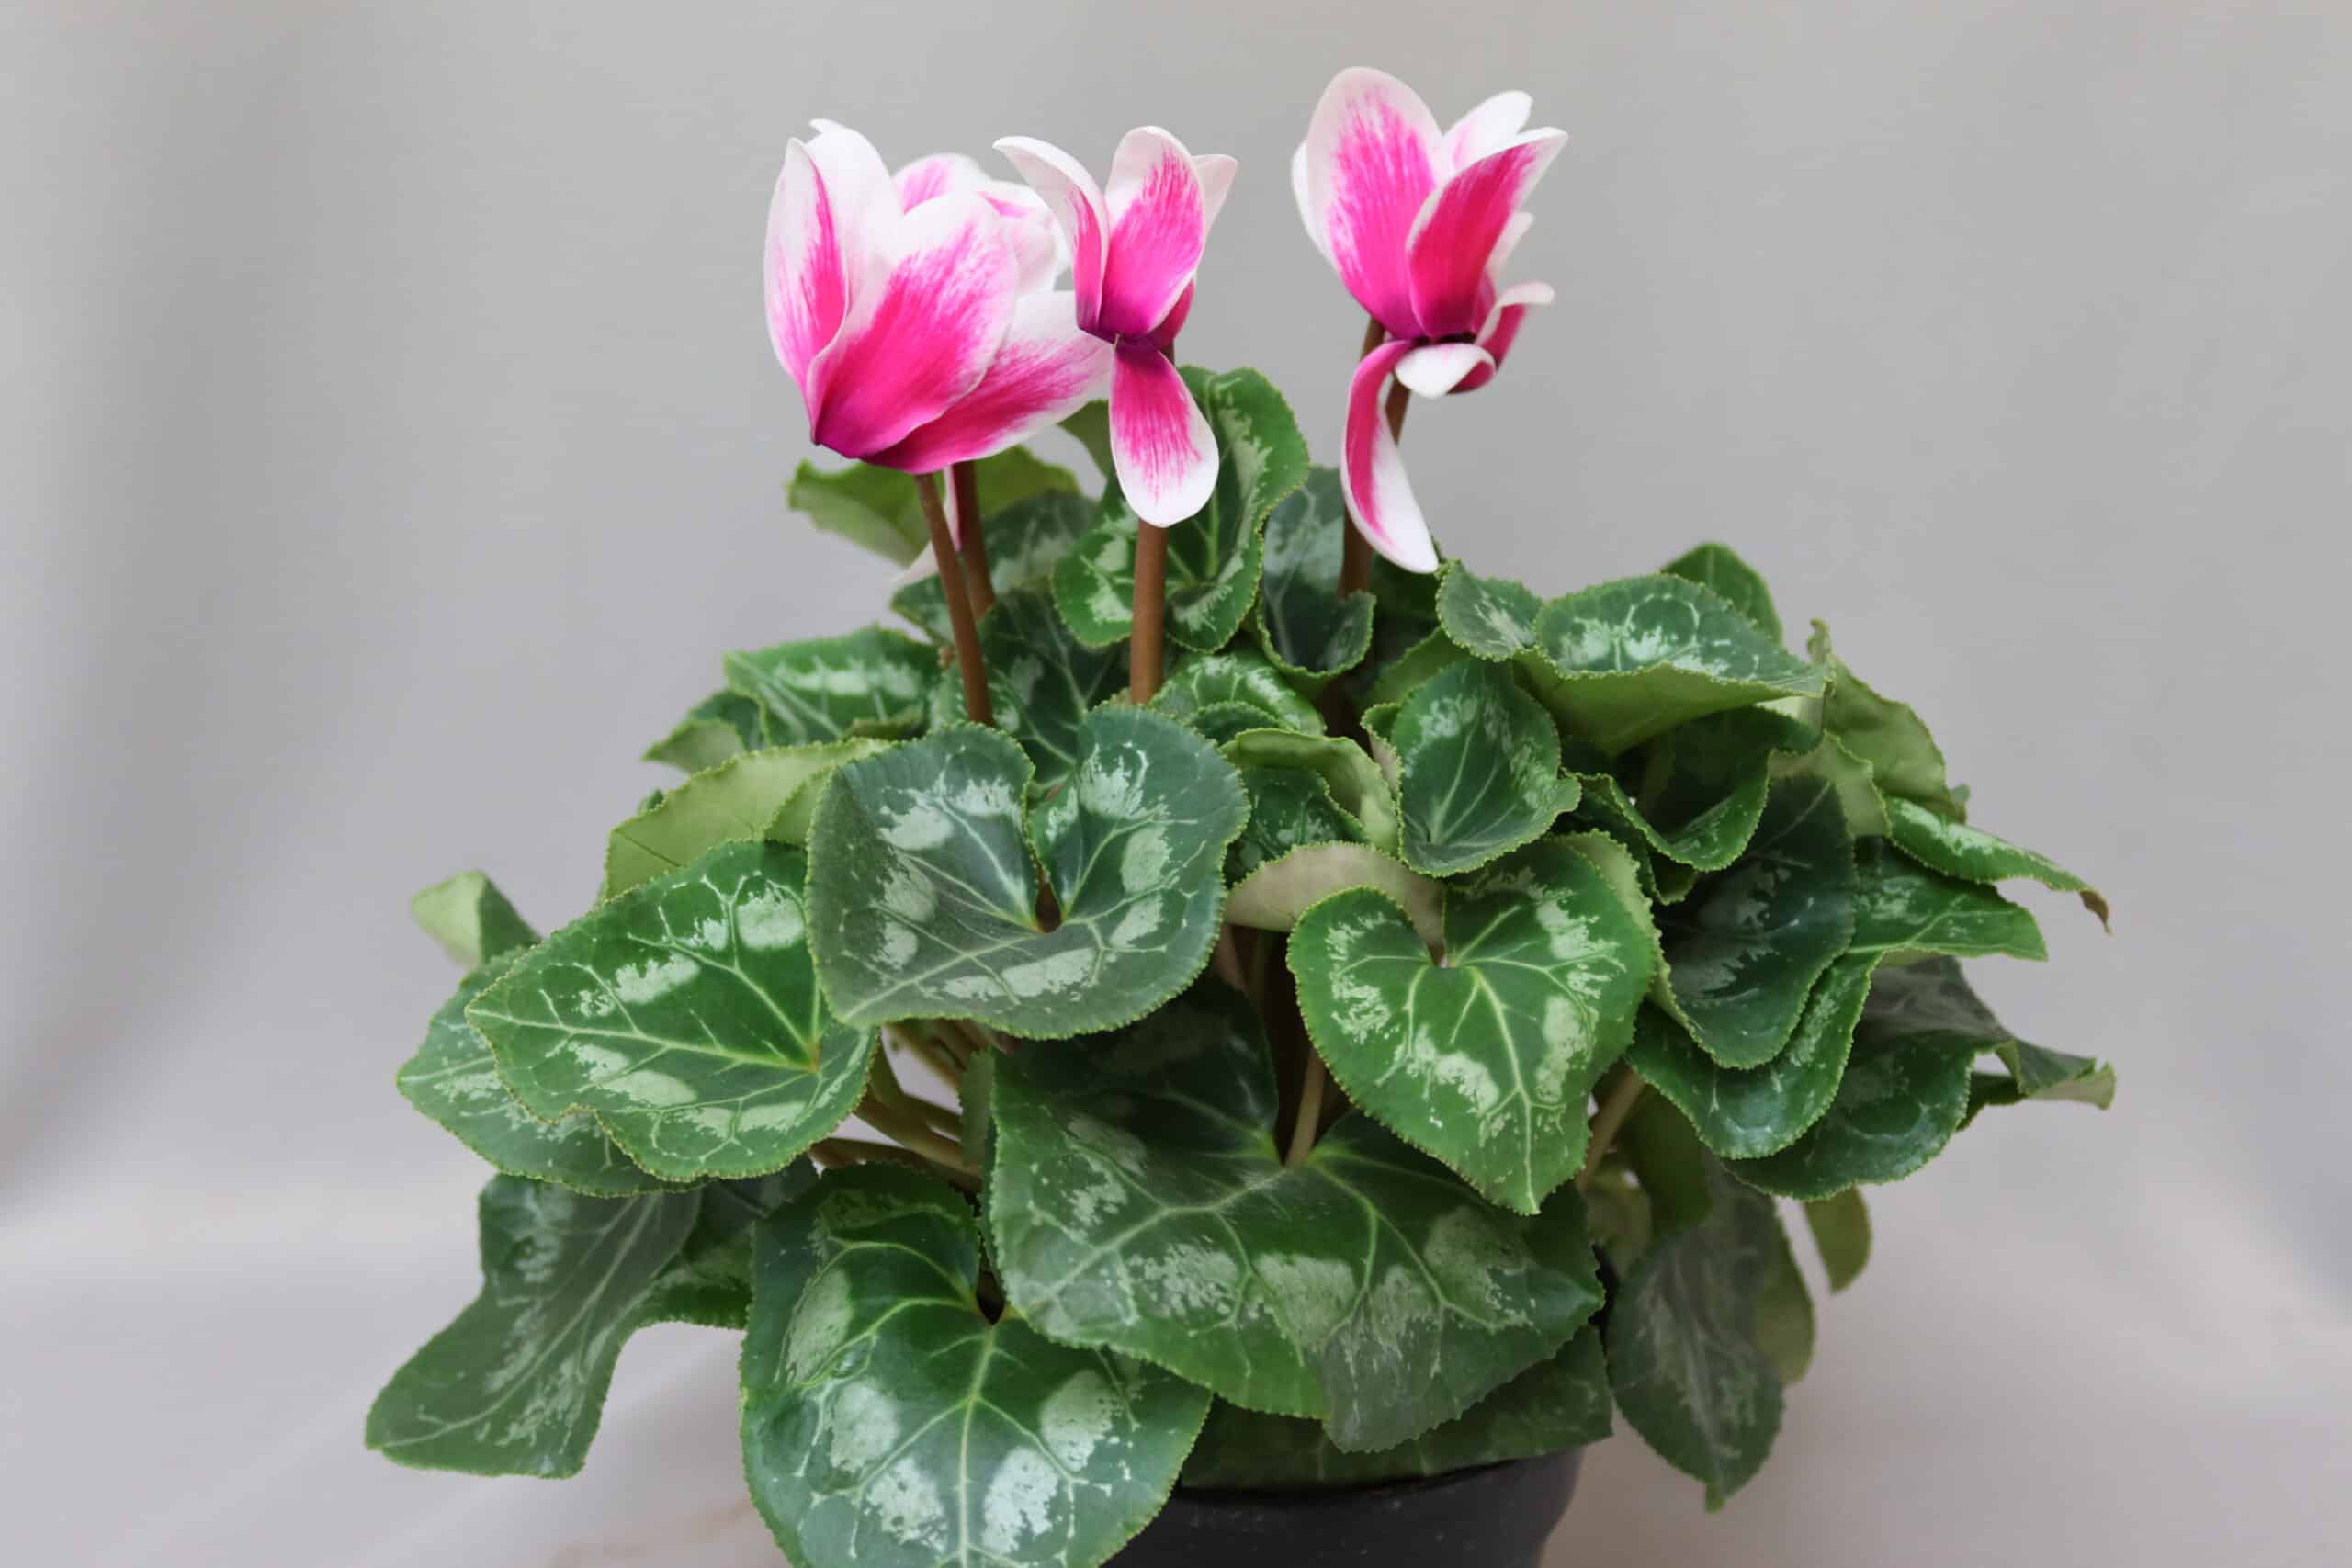 Variegated green leaves and white-and-pink flowers of the Cyclamen plant in a pot.